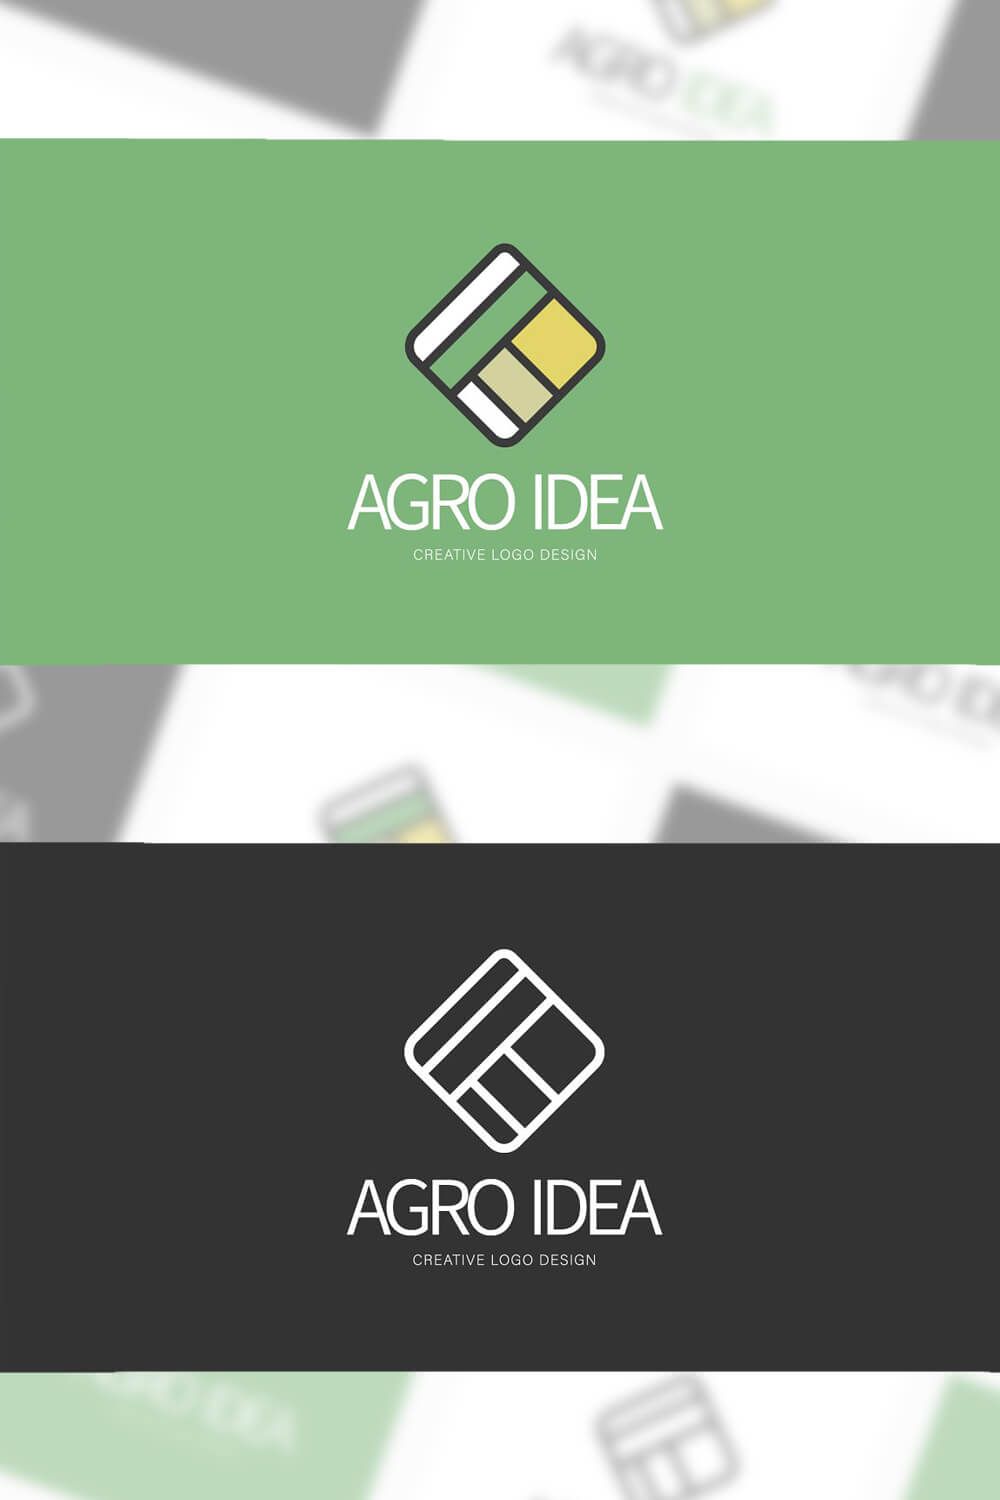 Two logos "Agro Idea" white-olive-green-yellow on a green, gray background.